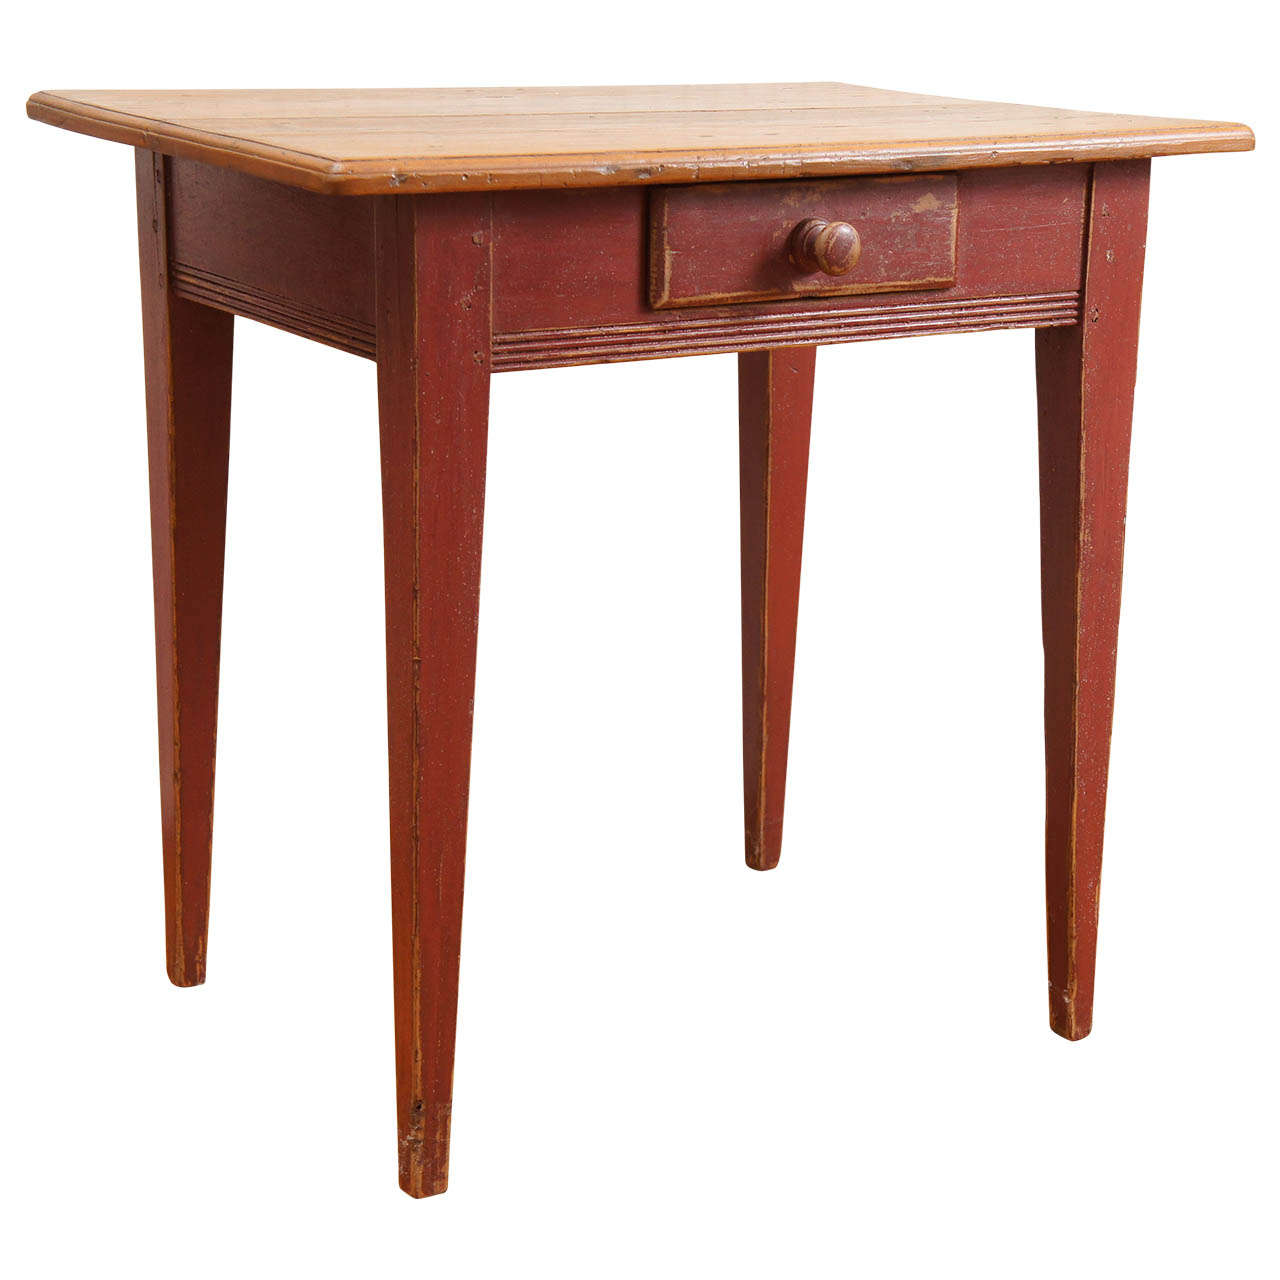 Small Canadian Table with Red Base